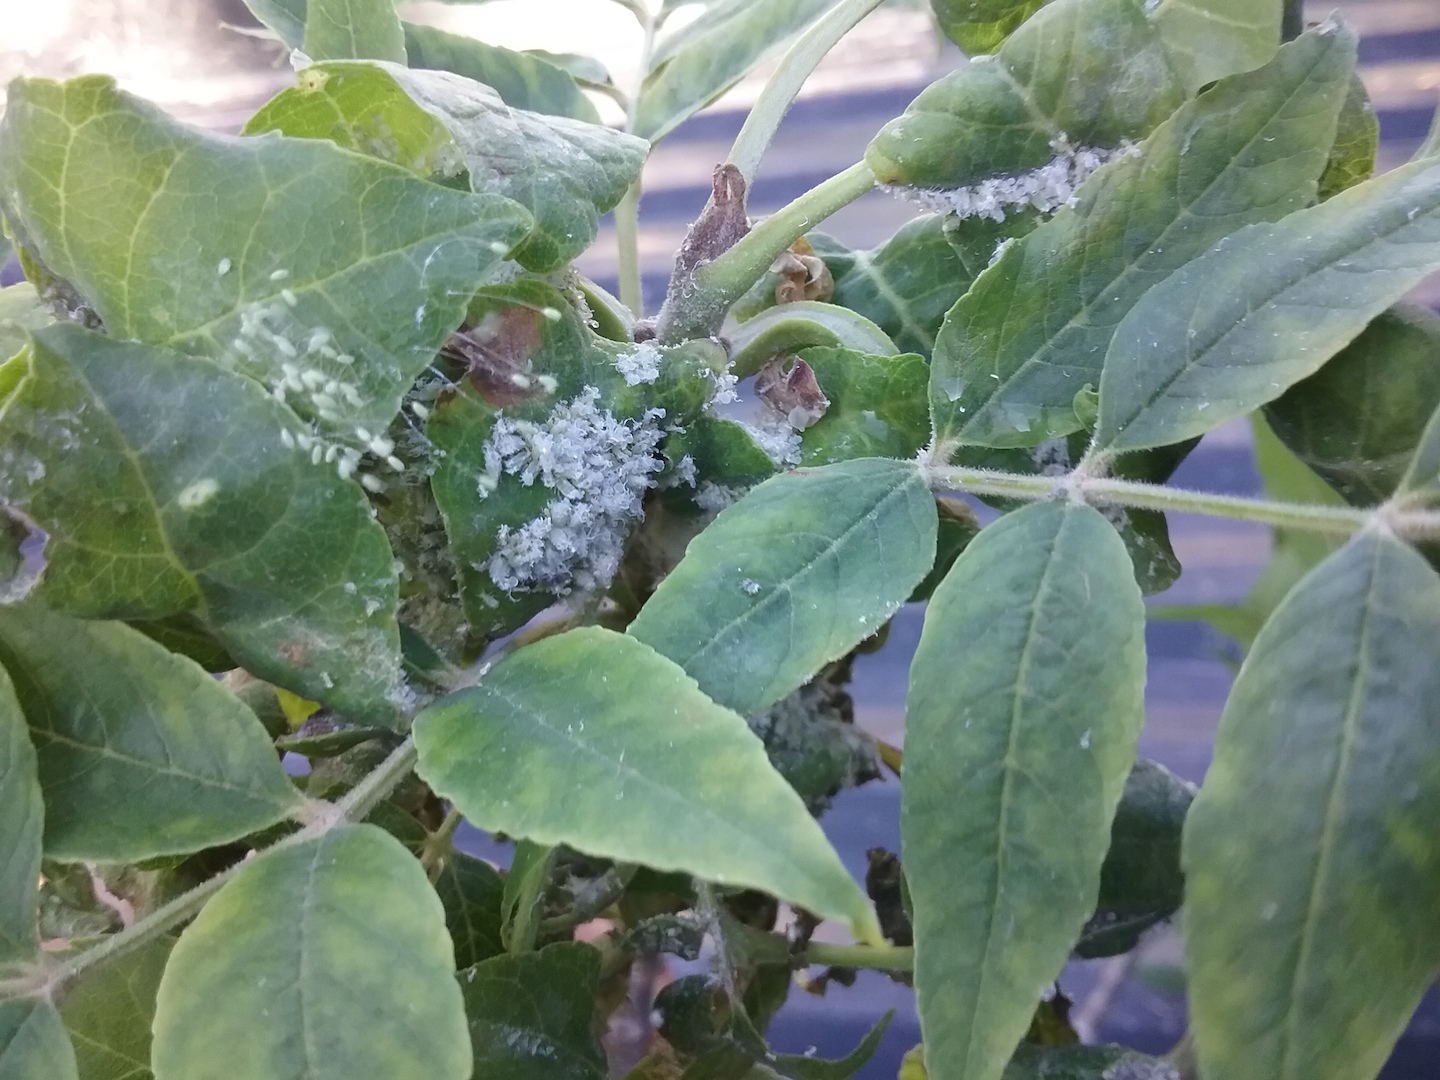 Ash tree leaves with white fuzzy critters